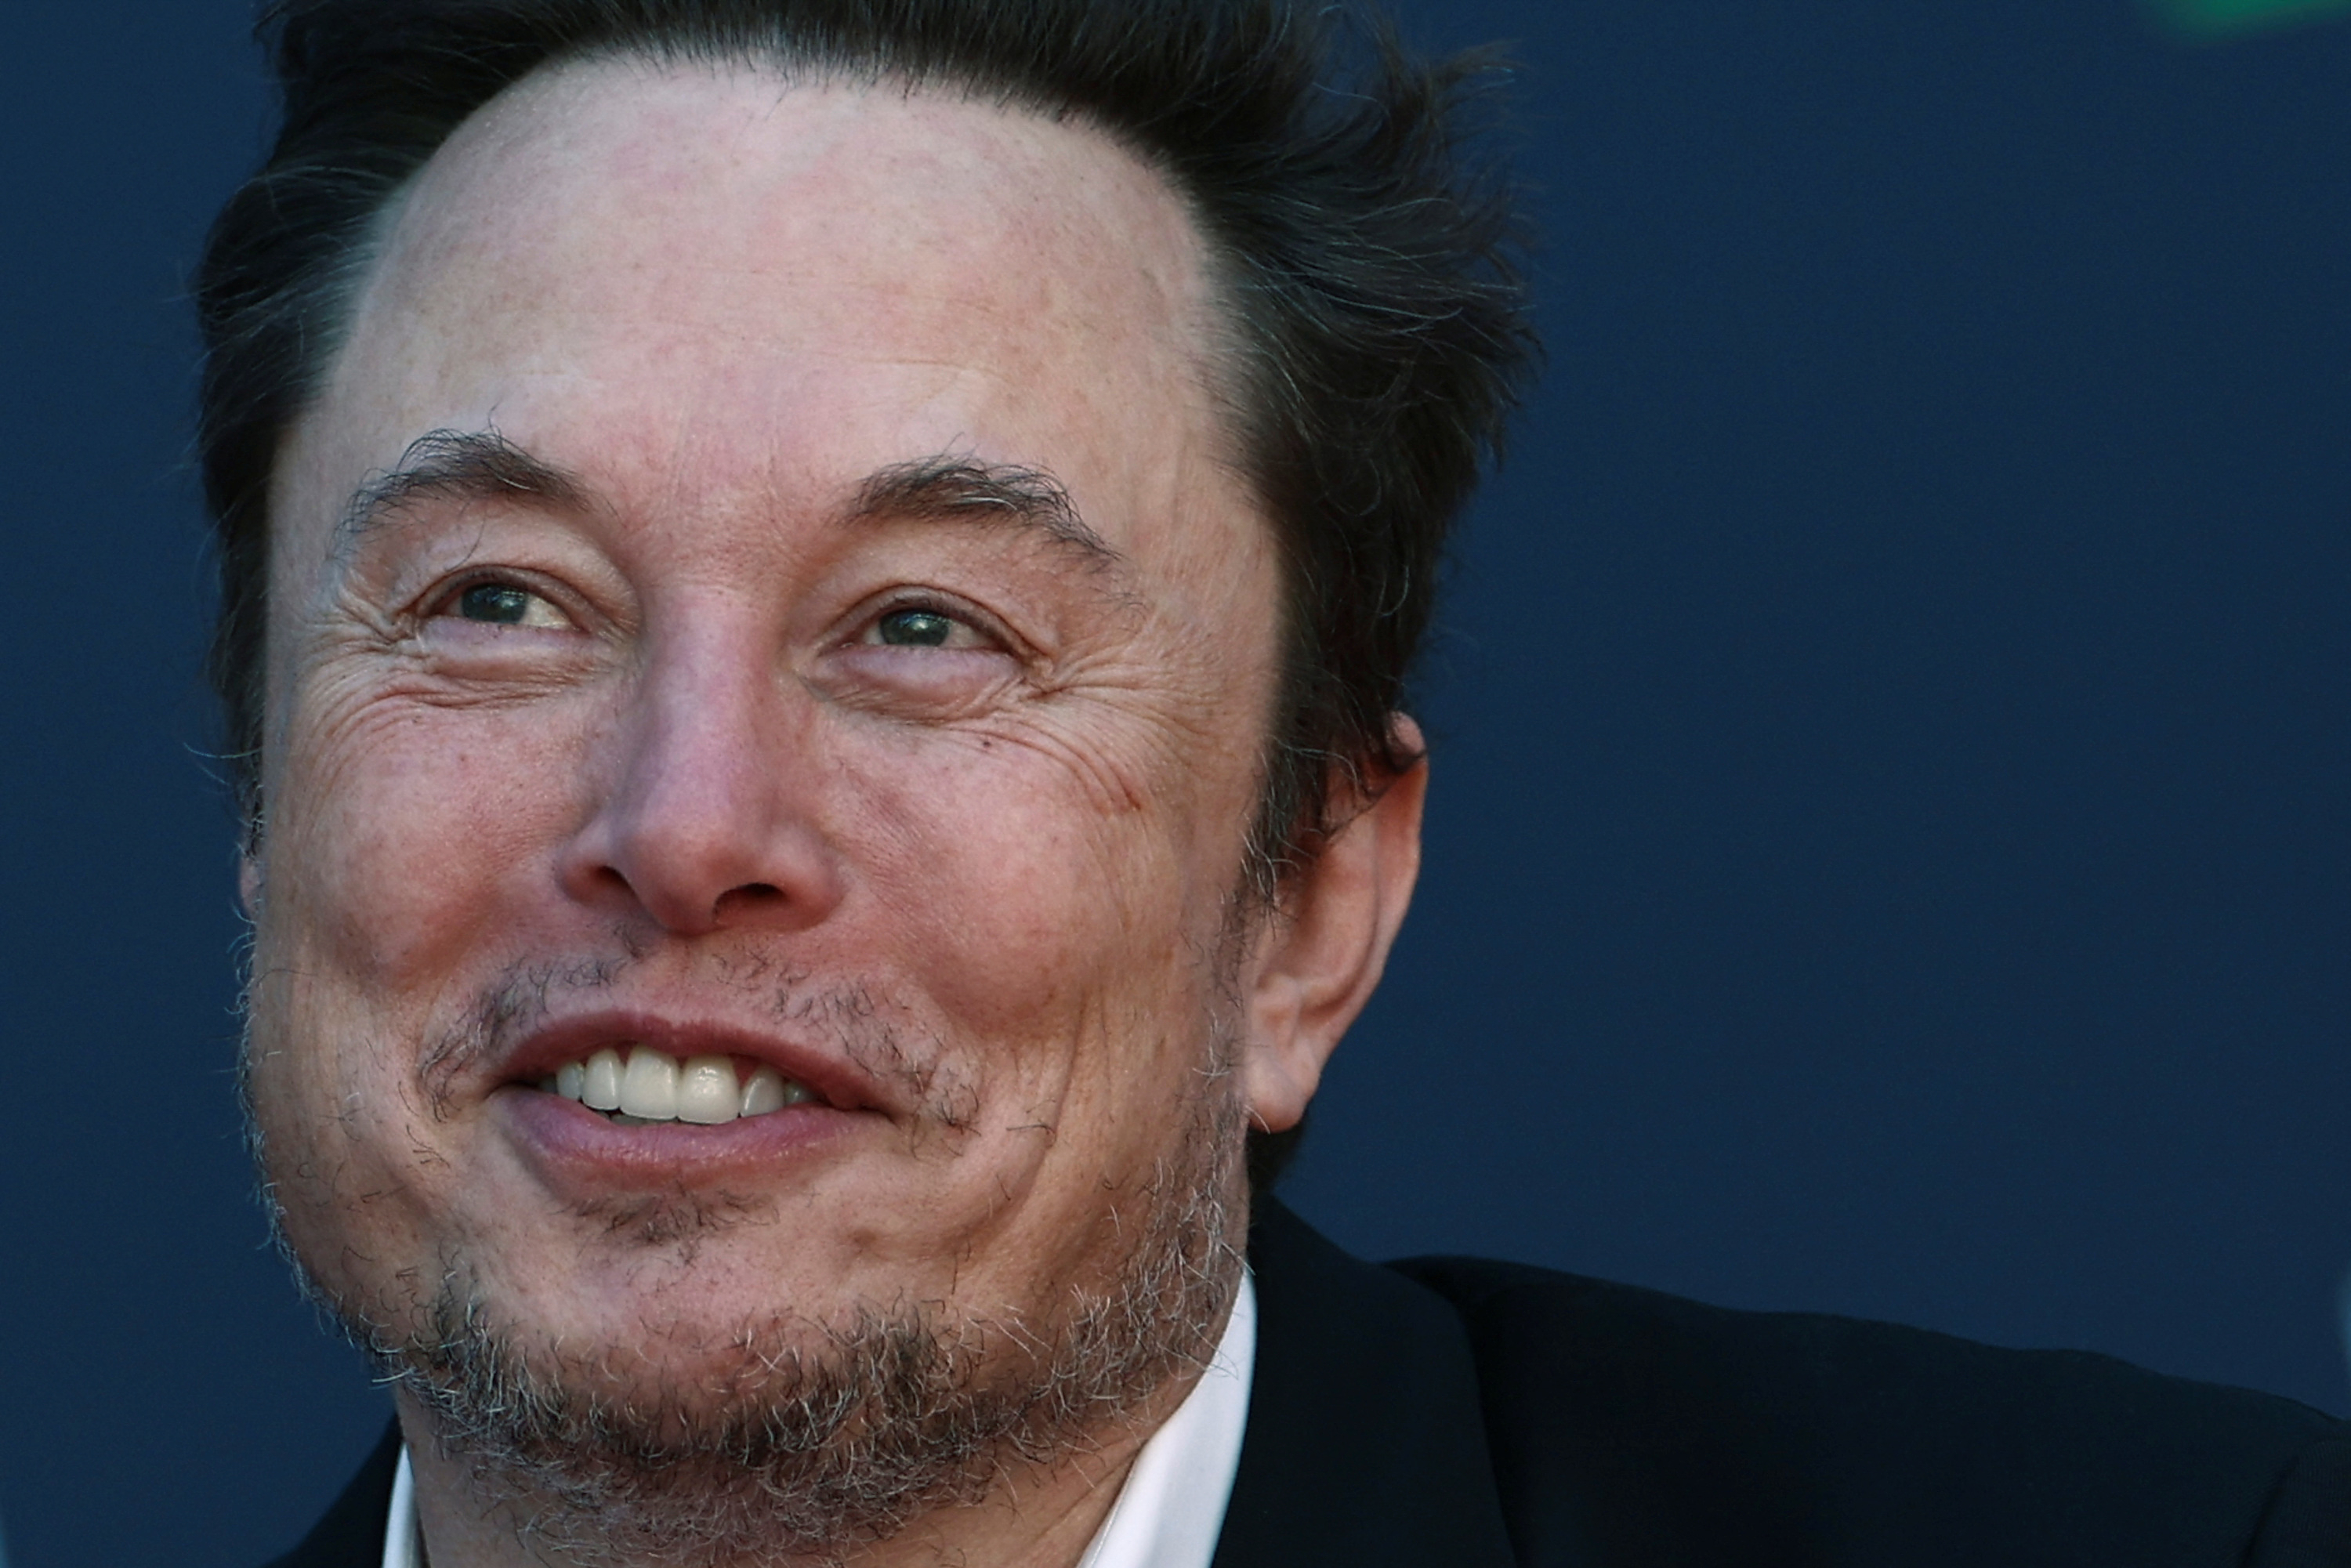 LSD, cocaine, ecstasy... Elon Musk's drug use worries Tesla and SpaceX executives